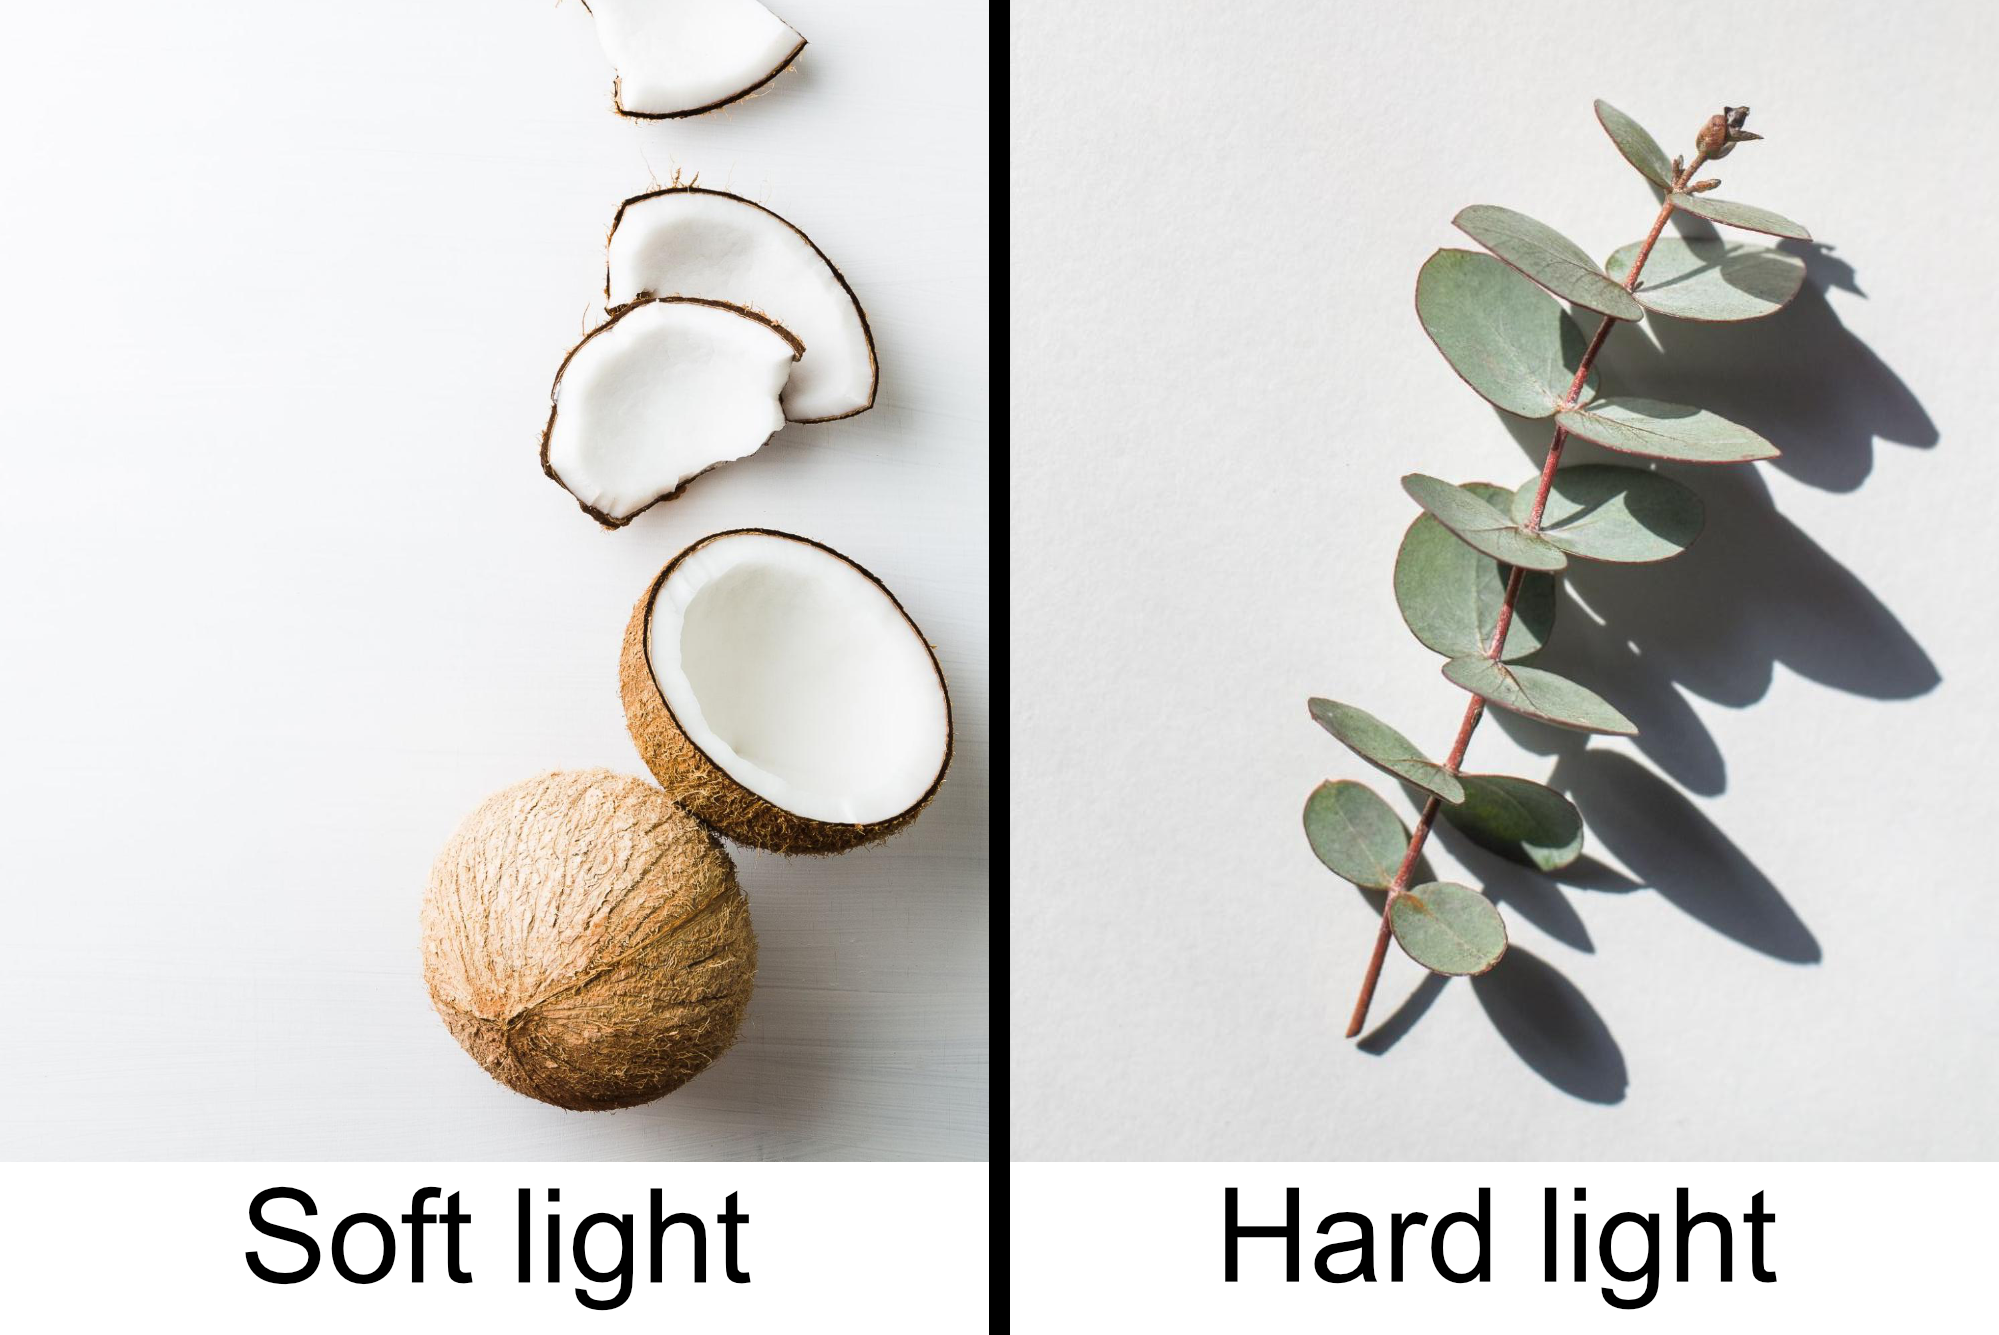 Two ecommerce photos side by side; on the right is a photo of coconuts casting a soft shadow, on the right is a eucalyptus leaf casting a hard shadow with defined lines